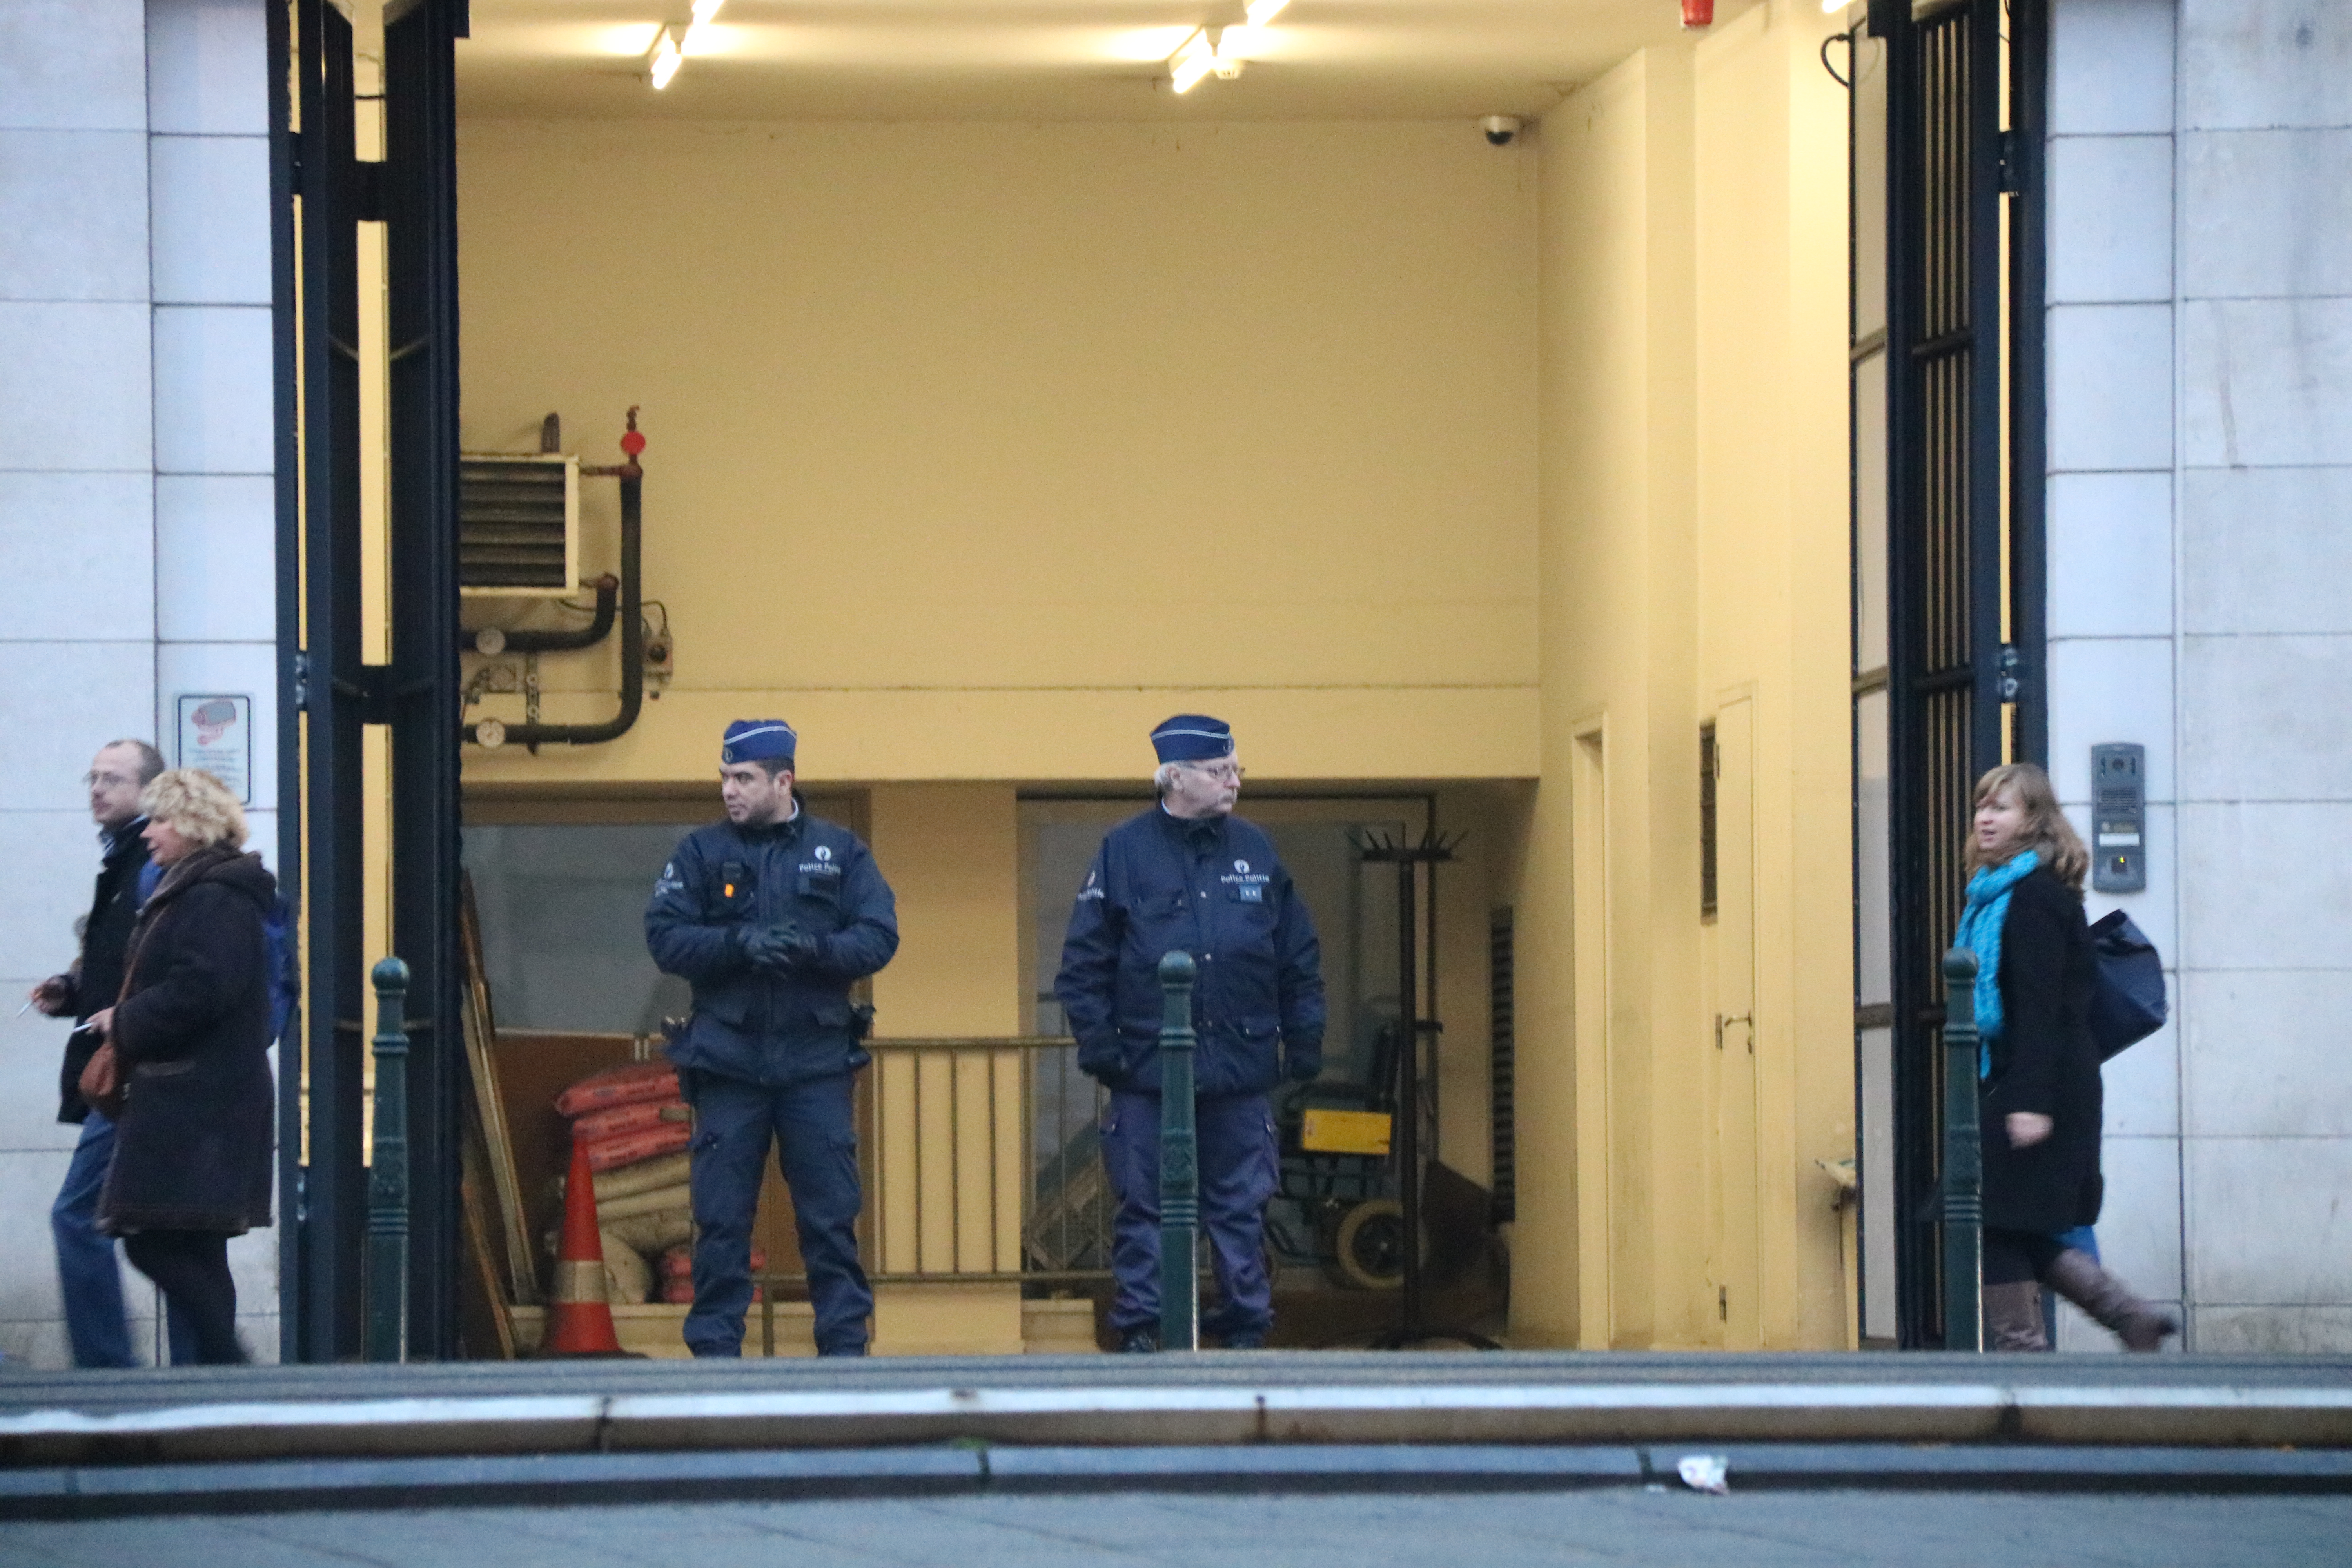 The Belgian police at the entrance to the building (by Nazaret Romero)